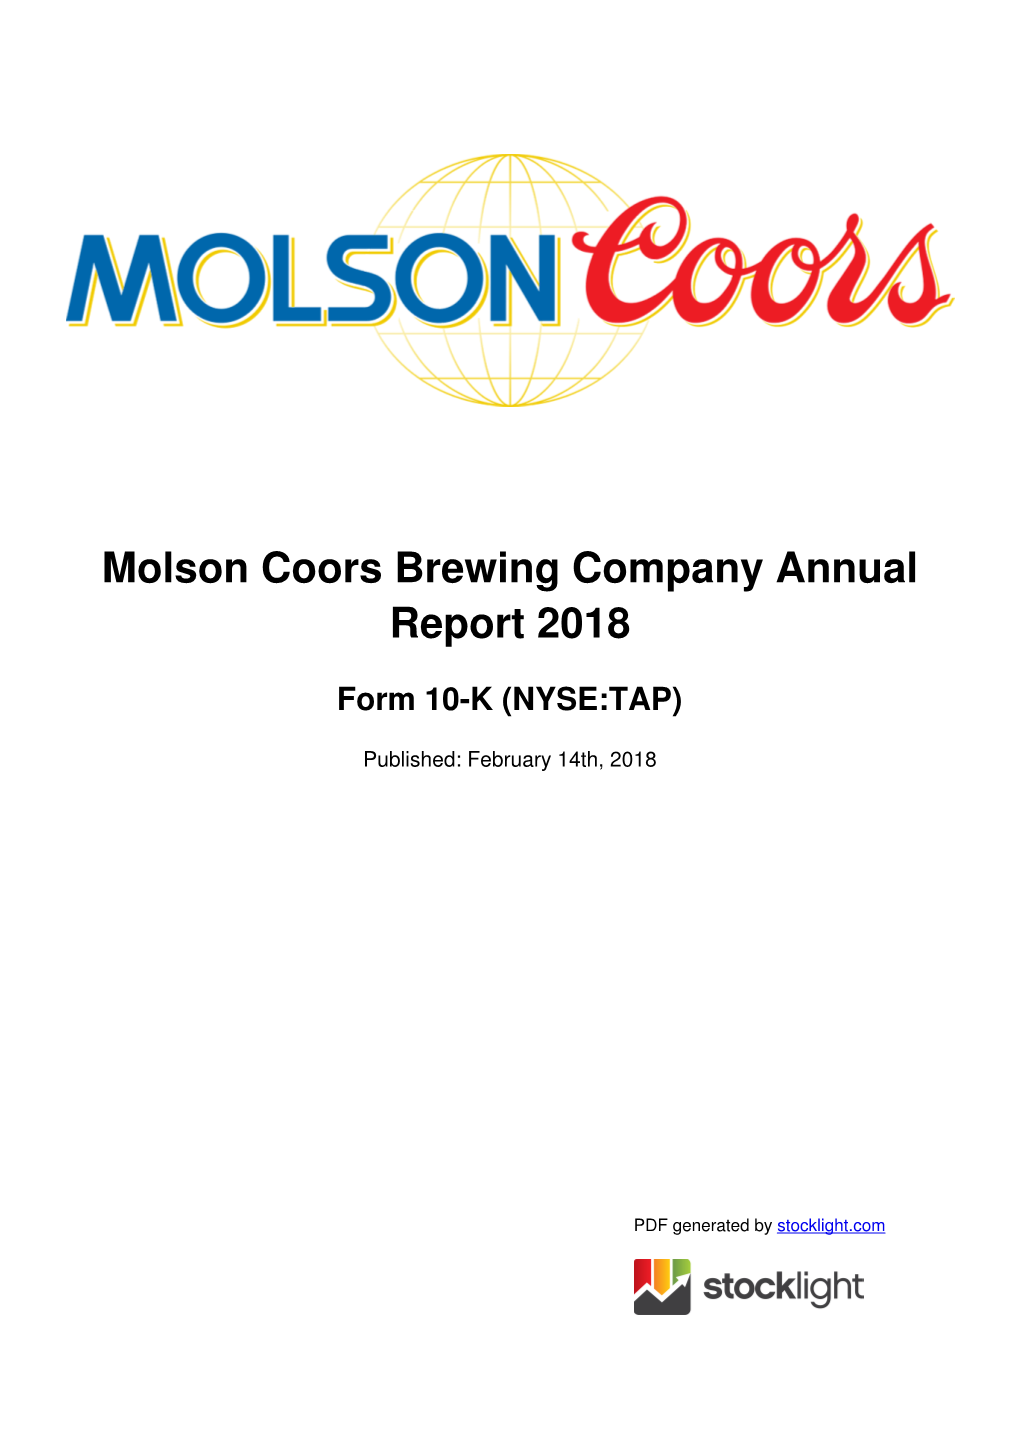 Molson Coors Brewing Company Annual Report 2018